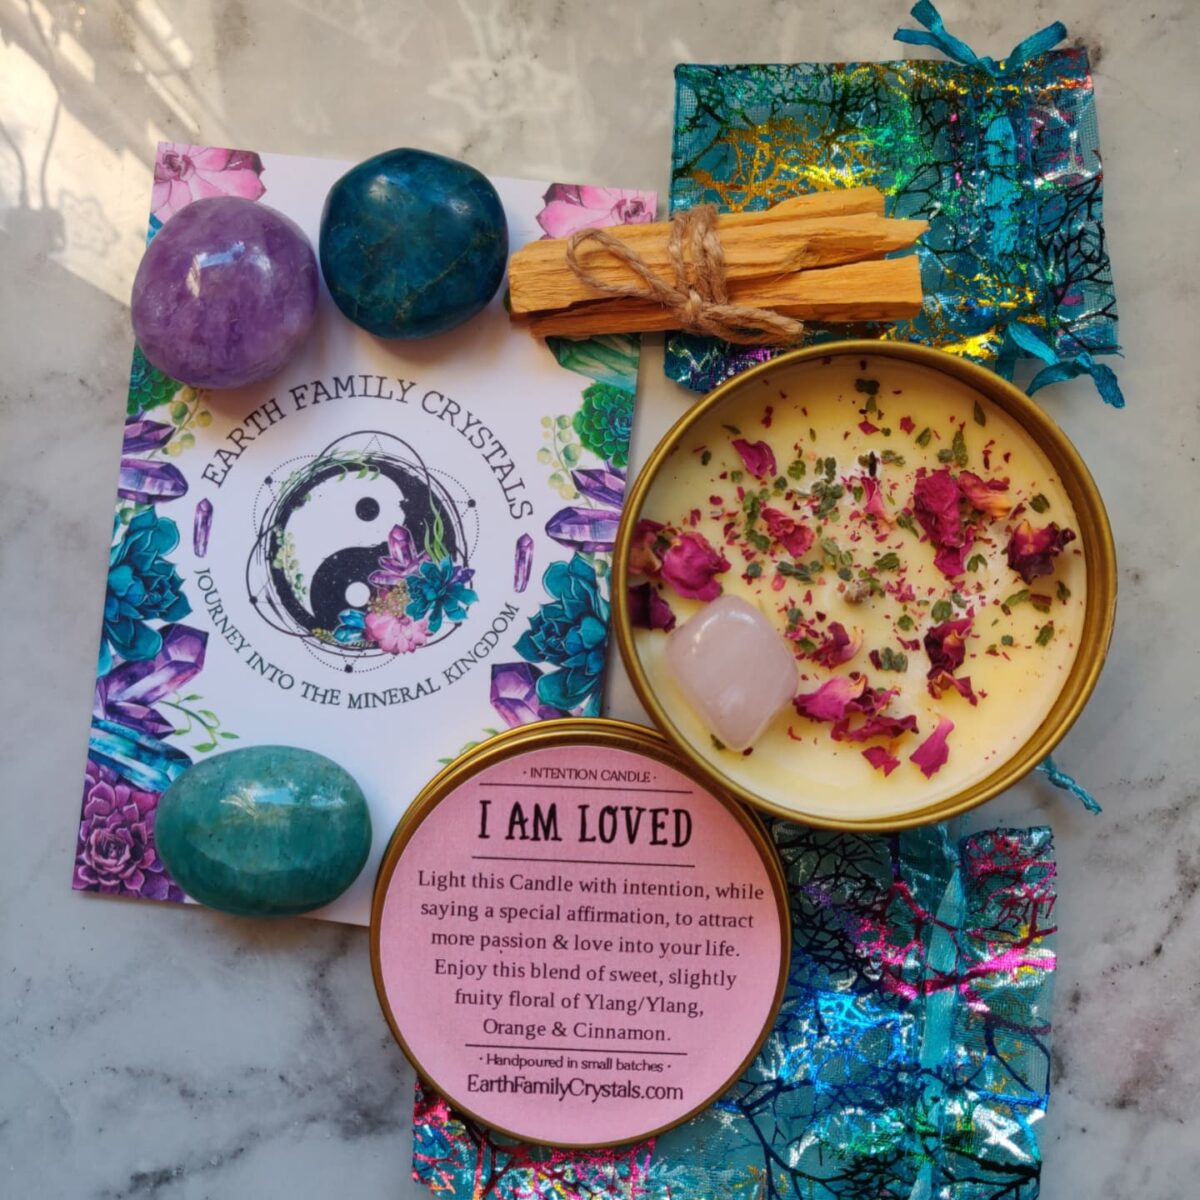 Earth Family Crystals review – Green Life In Dublin